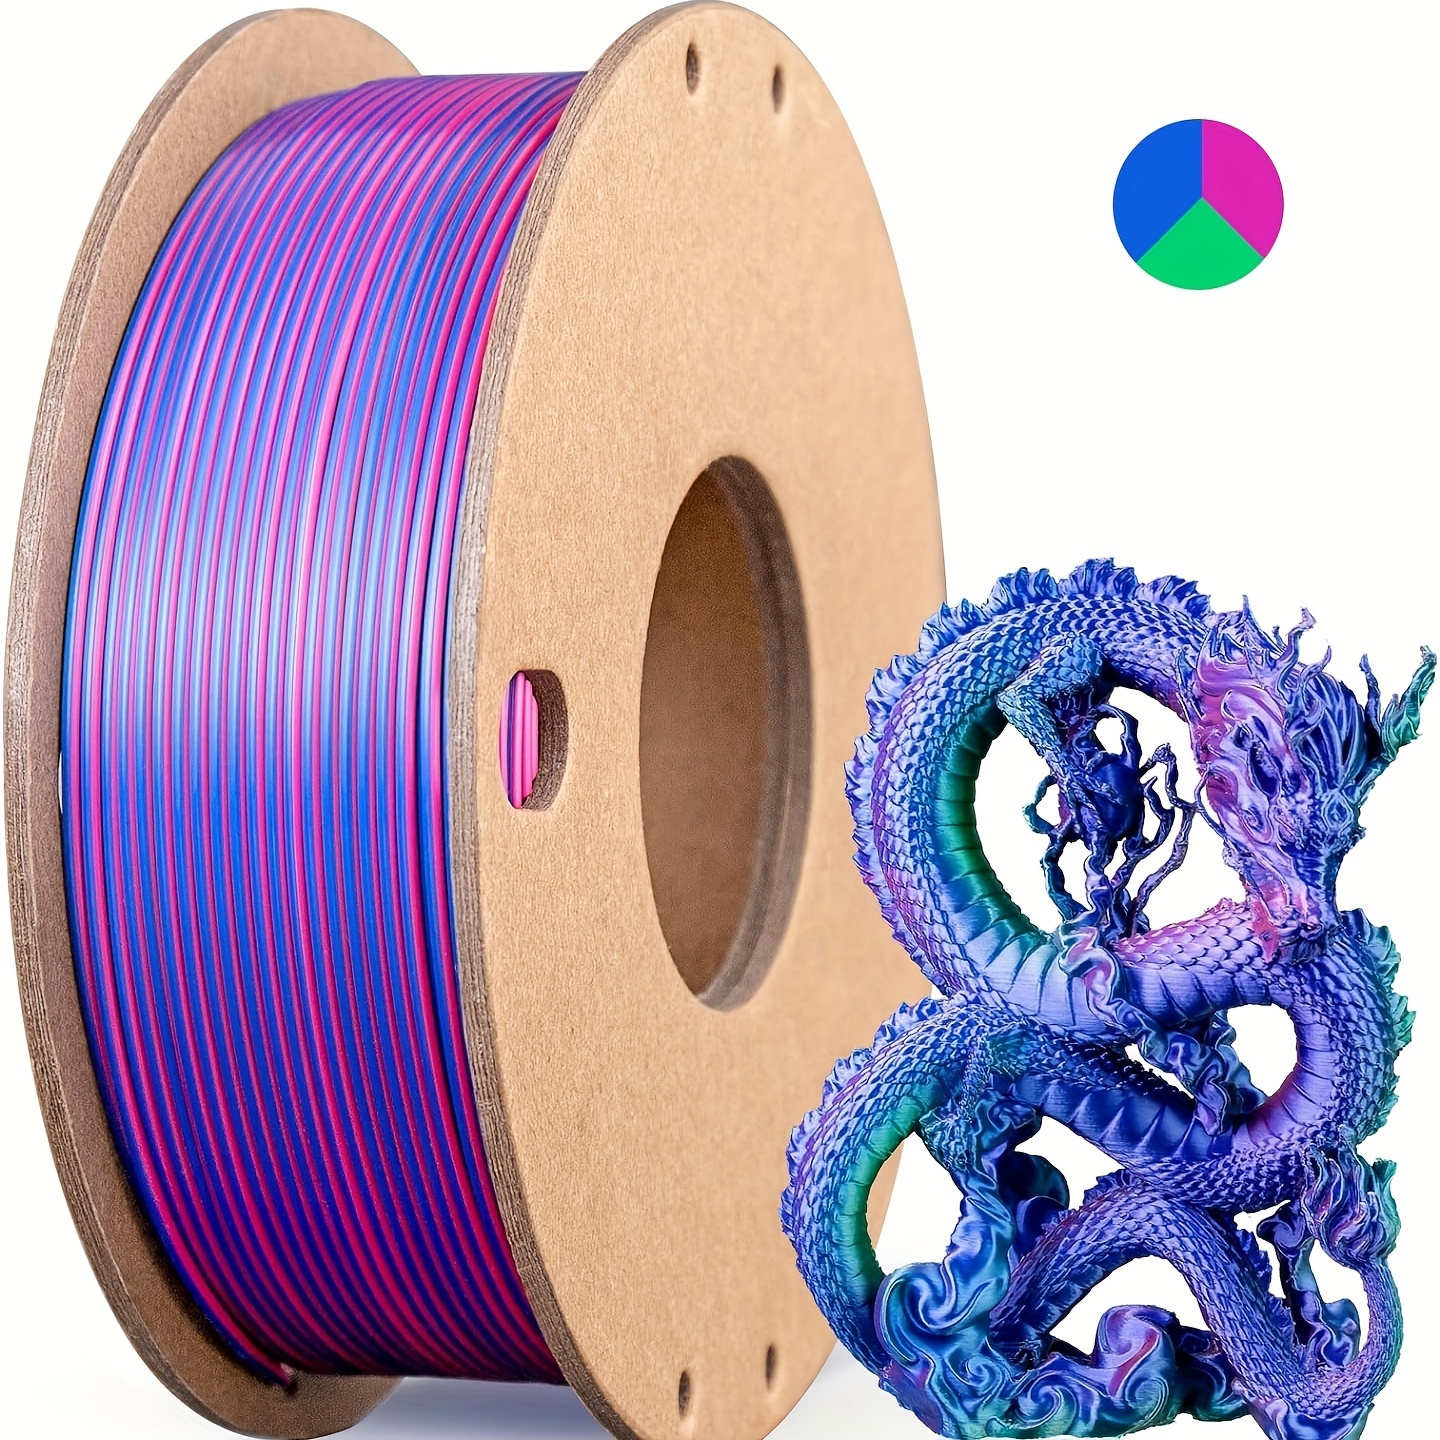 

Pla 3d Printer Filament 250g, 1.75mm Silk Multicolor (rose Red, Dark Blue, Green) 3 In 1 Spool For Smooth 3d Printing